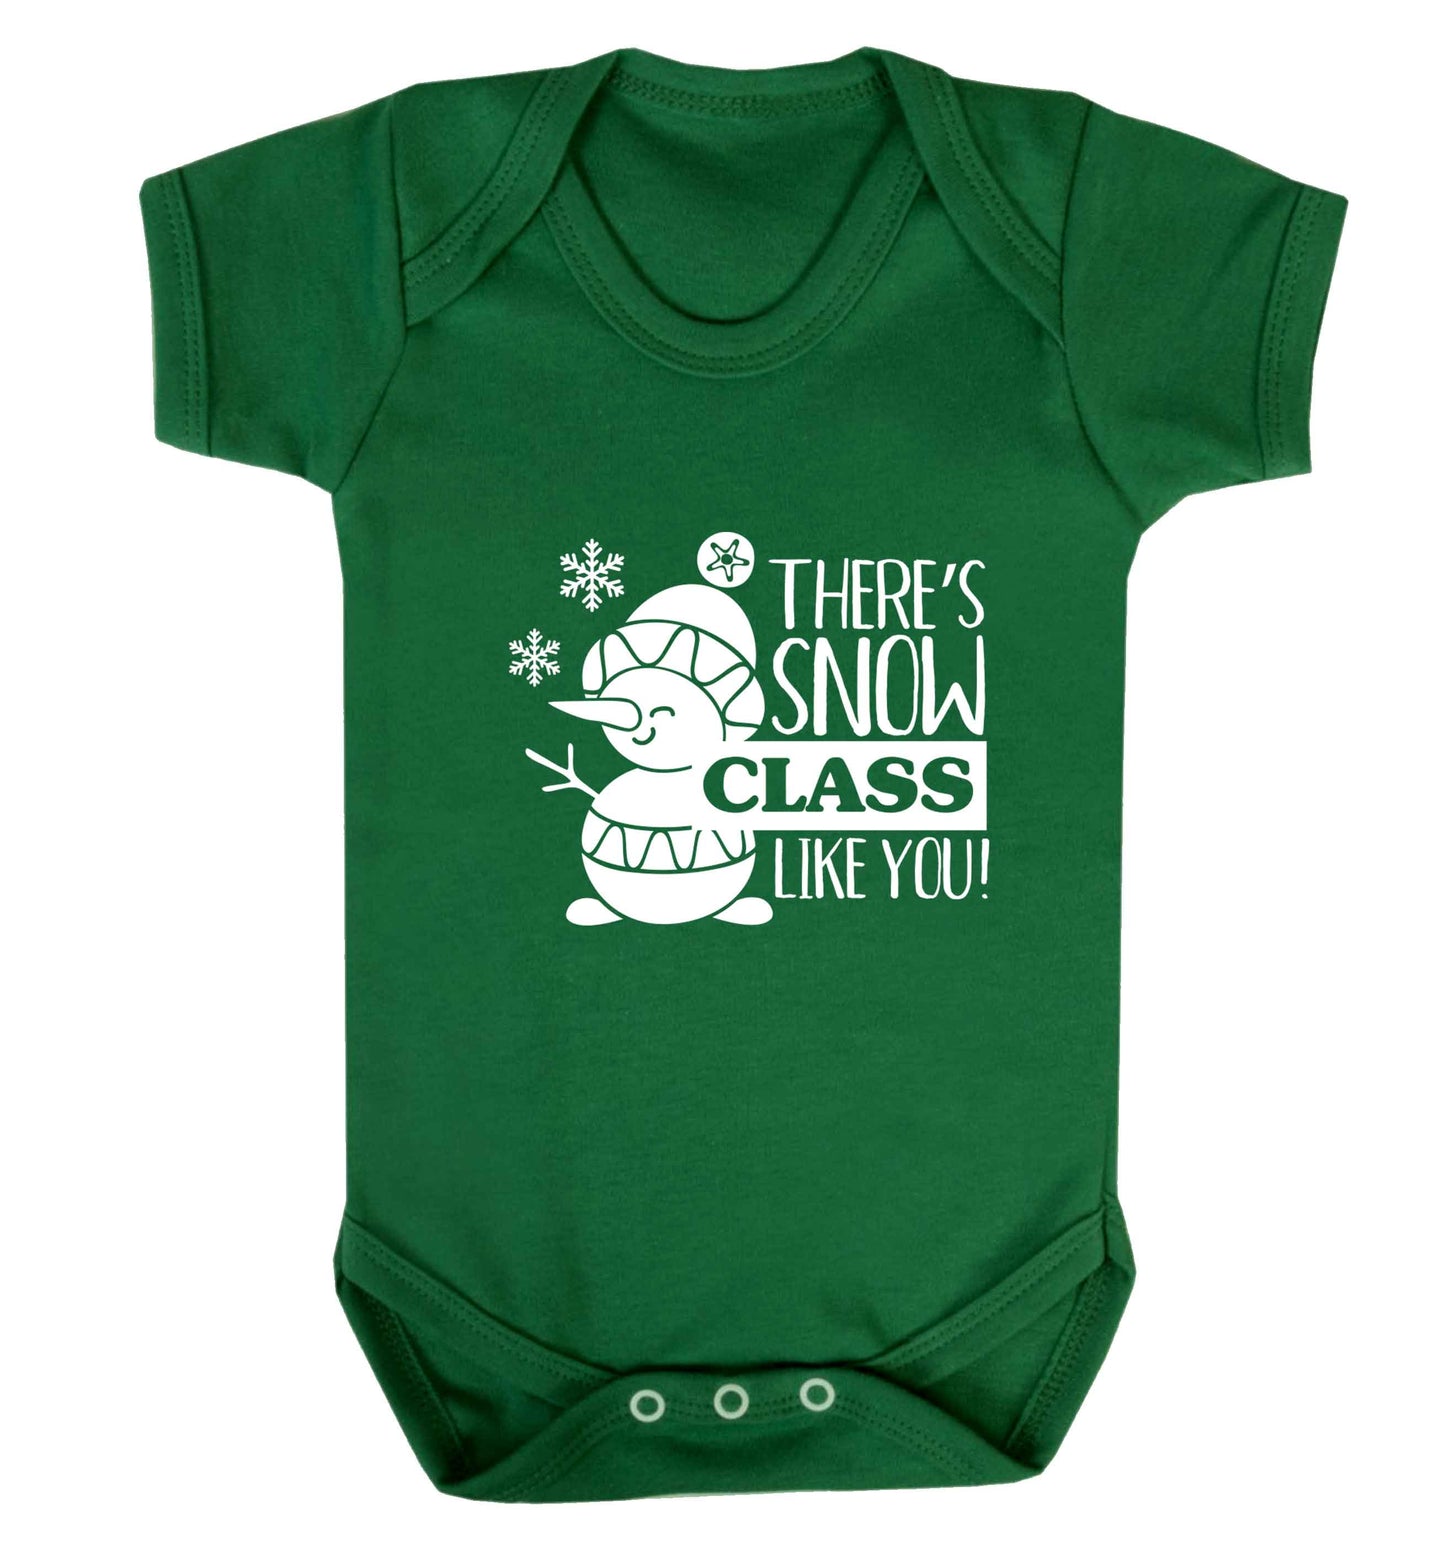 There's snow class like you baby vest green 18-24 months